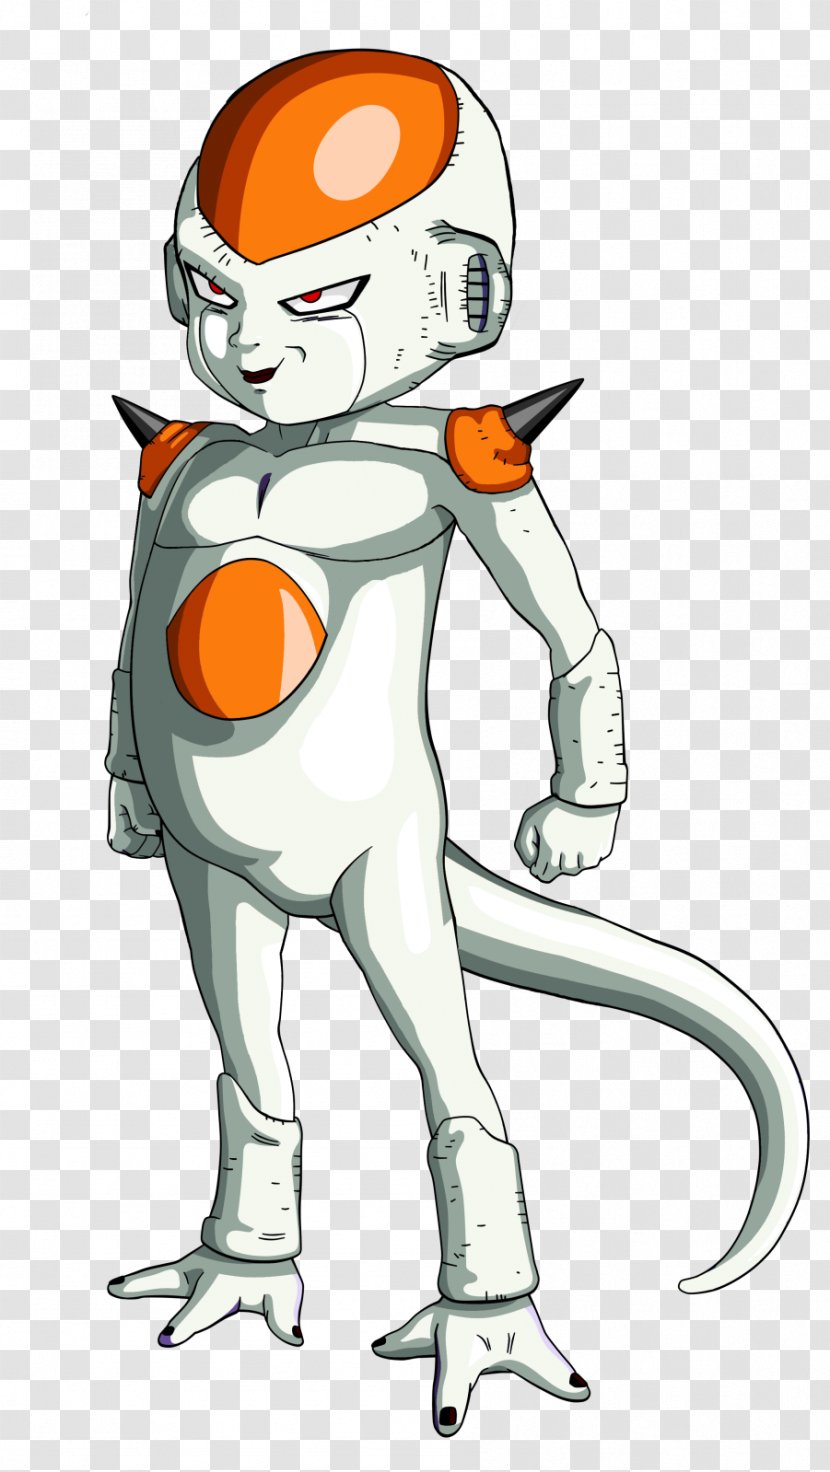 Goku Krillin Frieza Cell Piccolo - Heart Transparent PNG